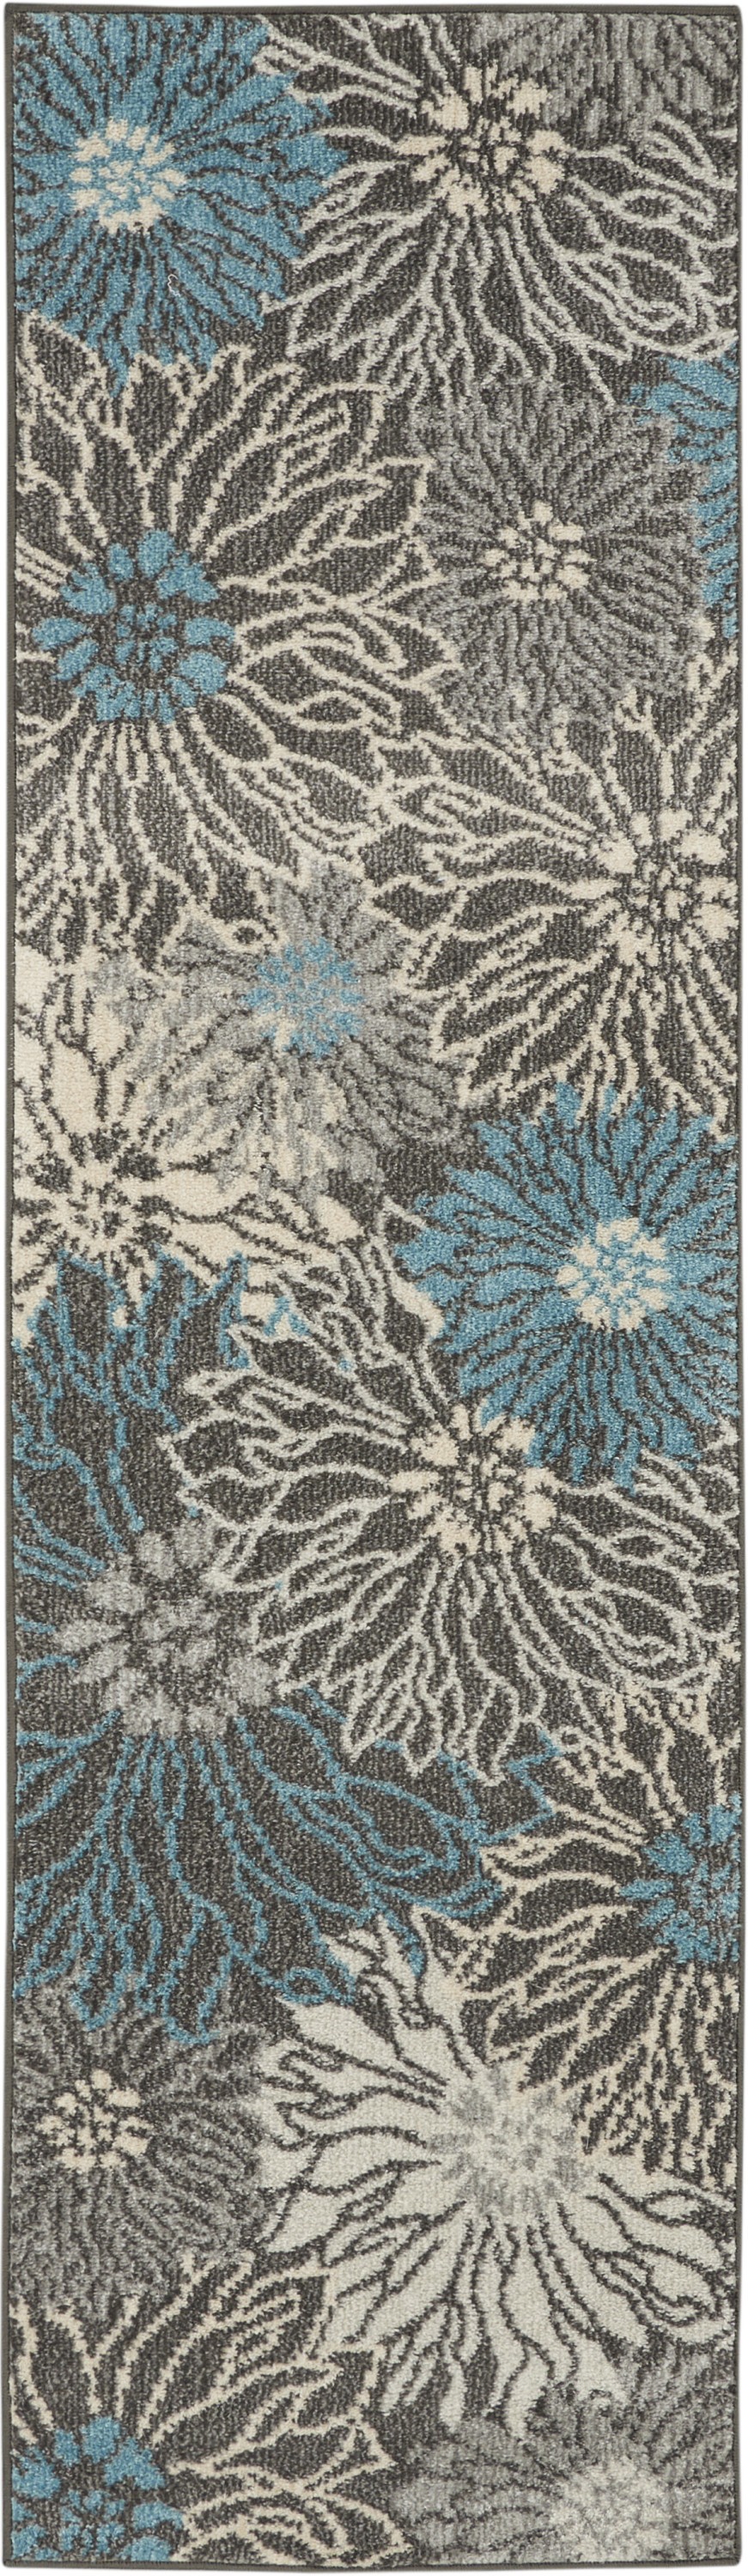 8' Blue And Gray Floral Power Loom Runner Rug-385411-1